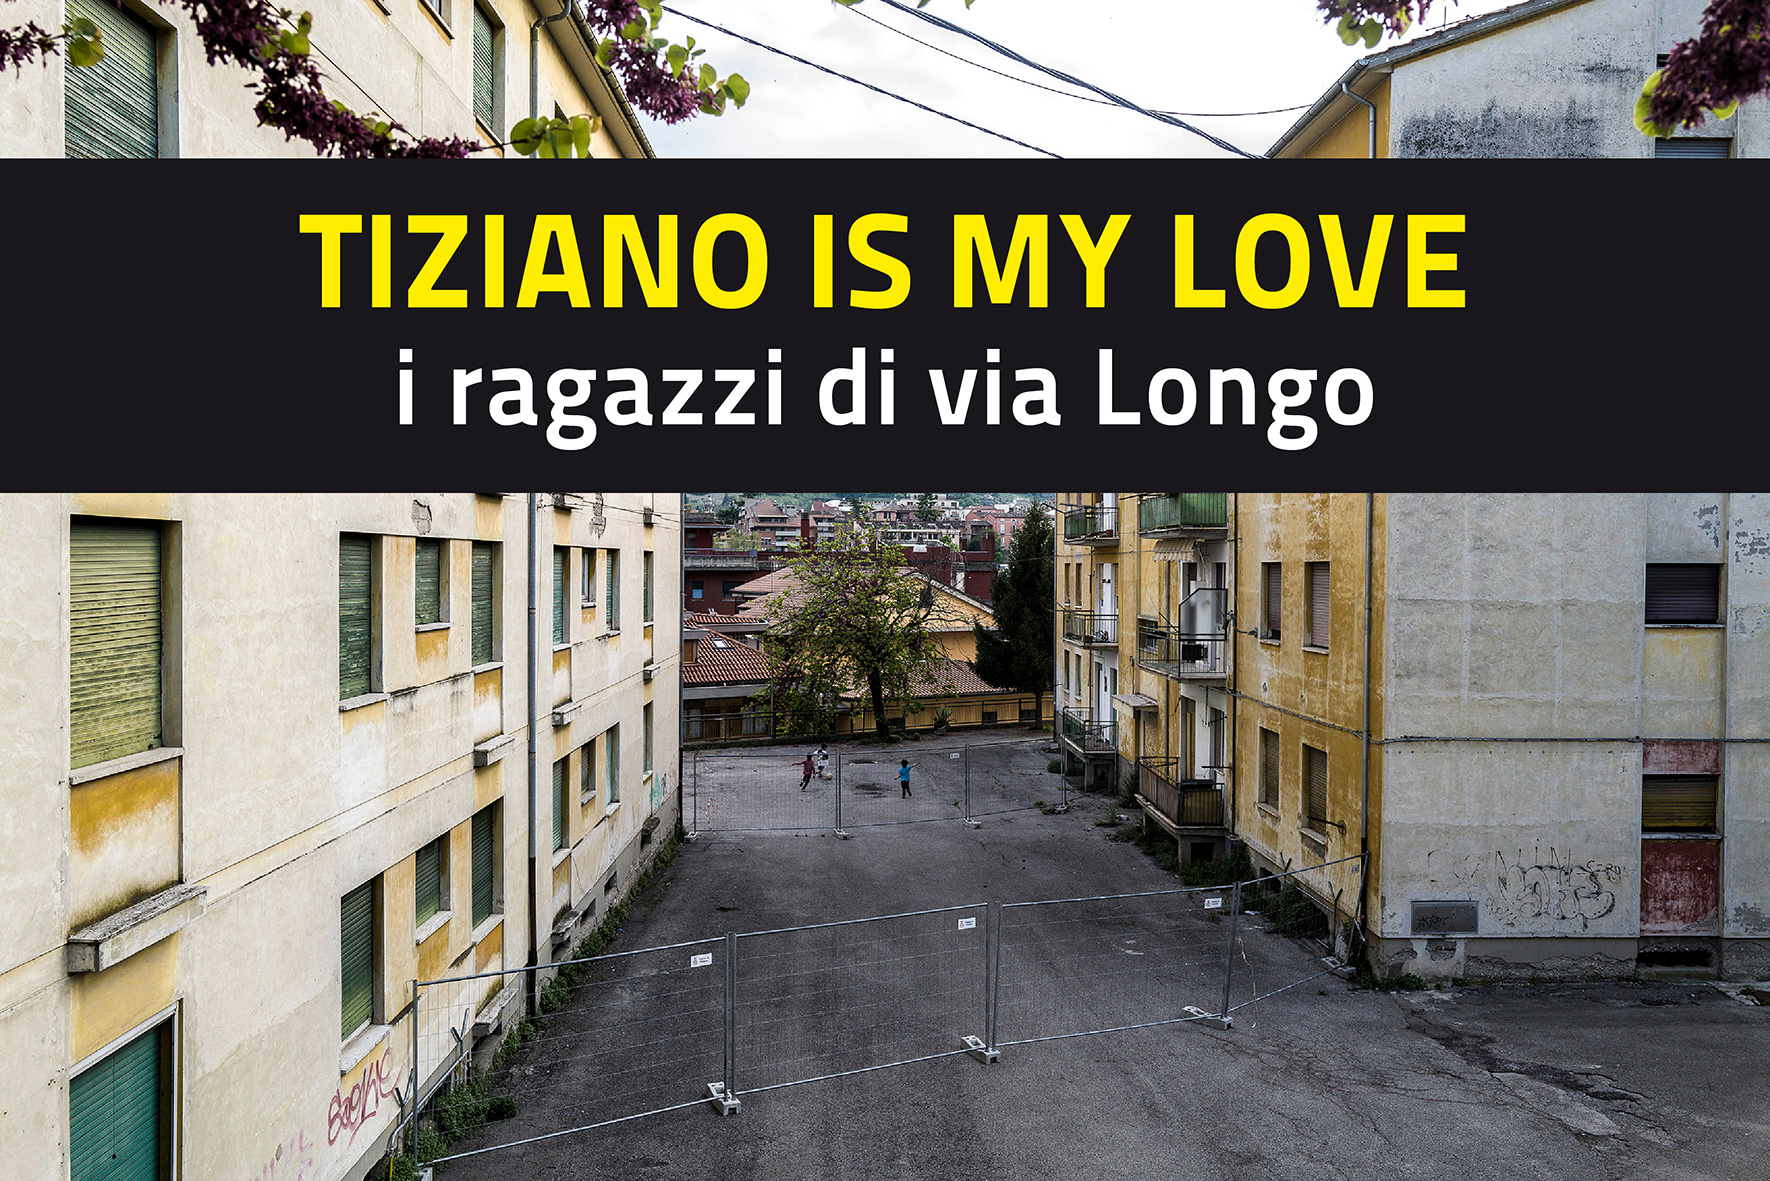 TIZIANO IS MY LOVE